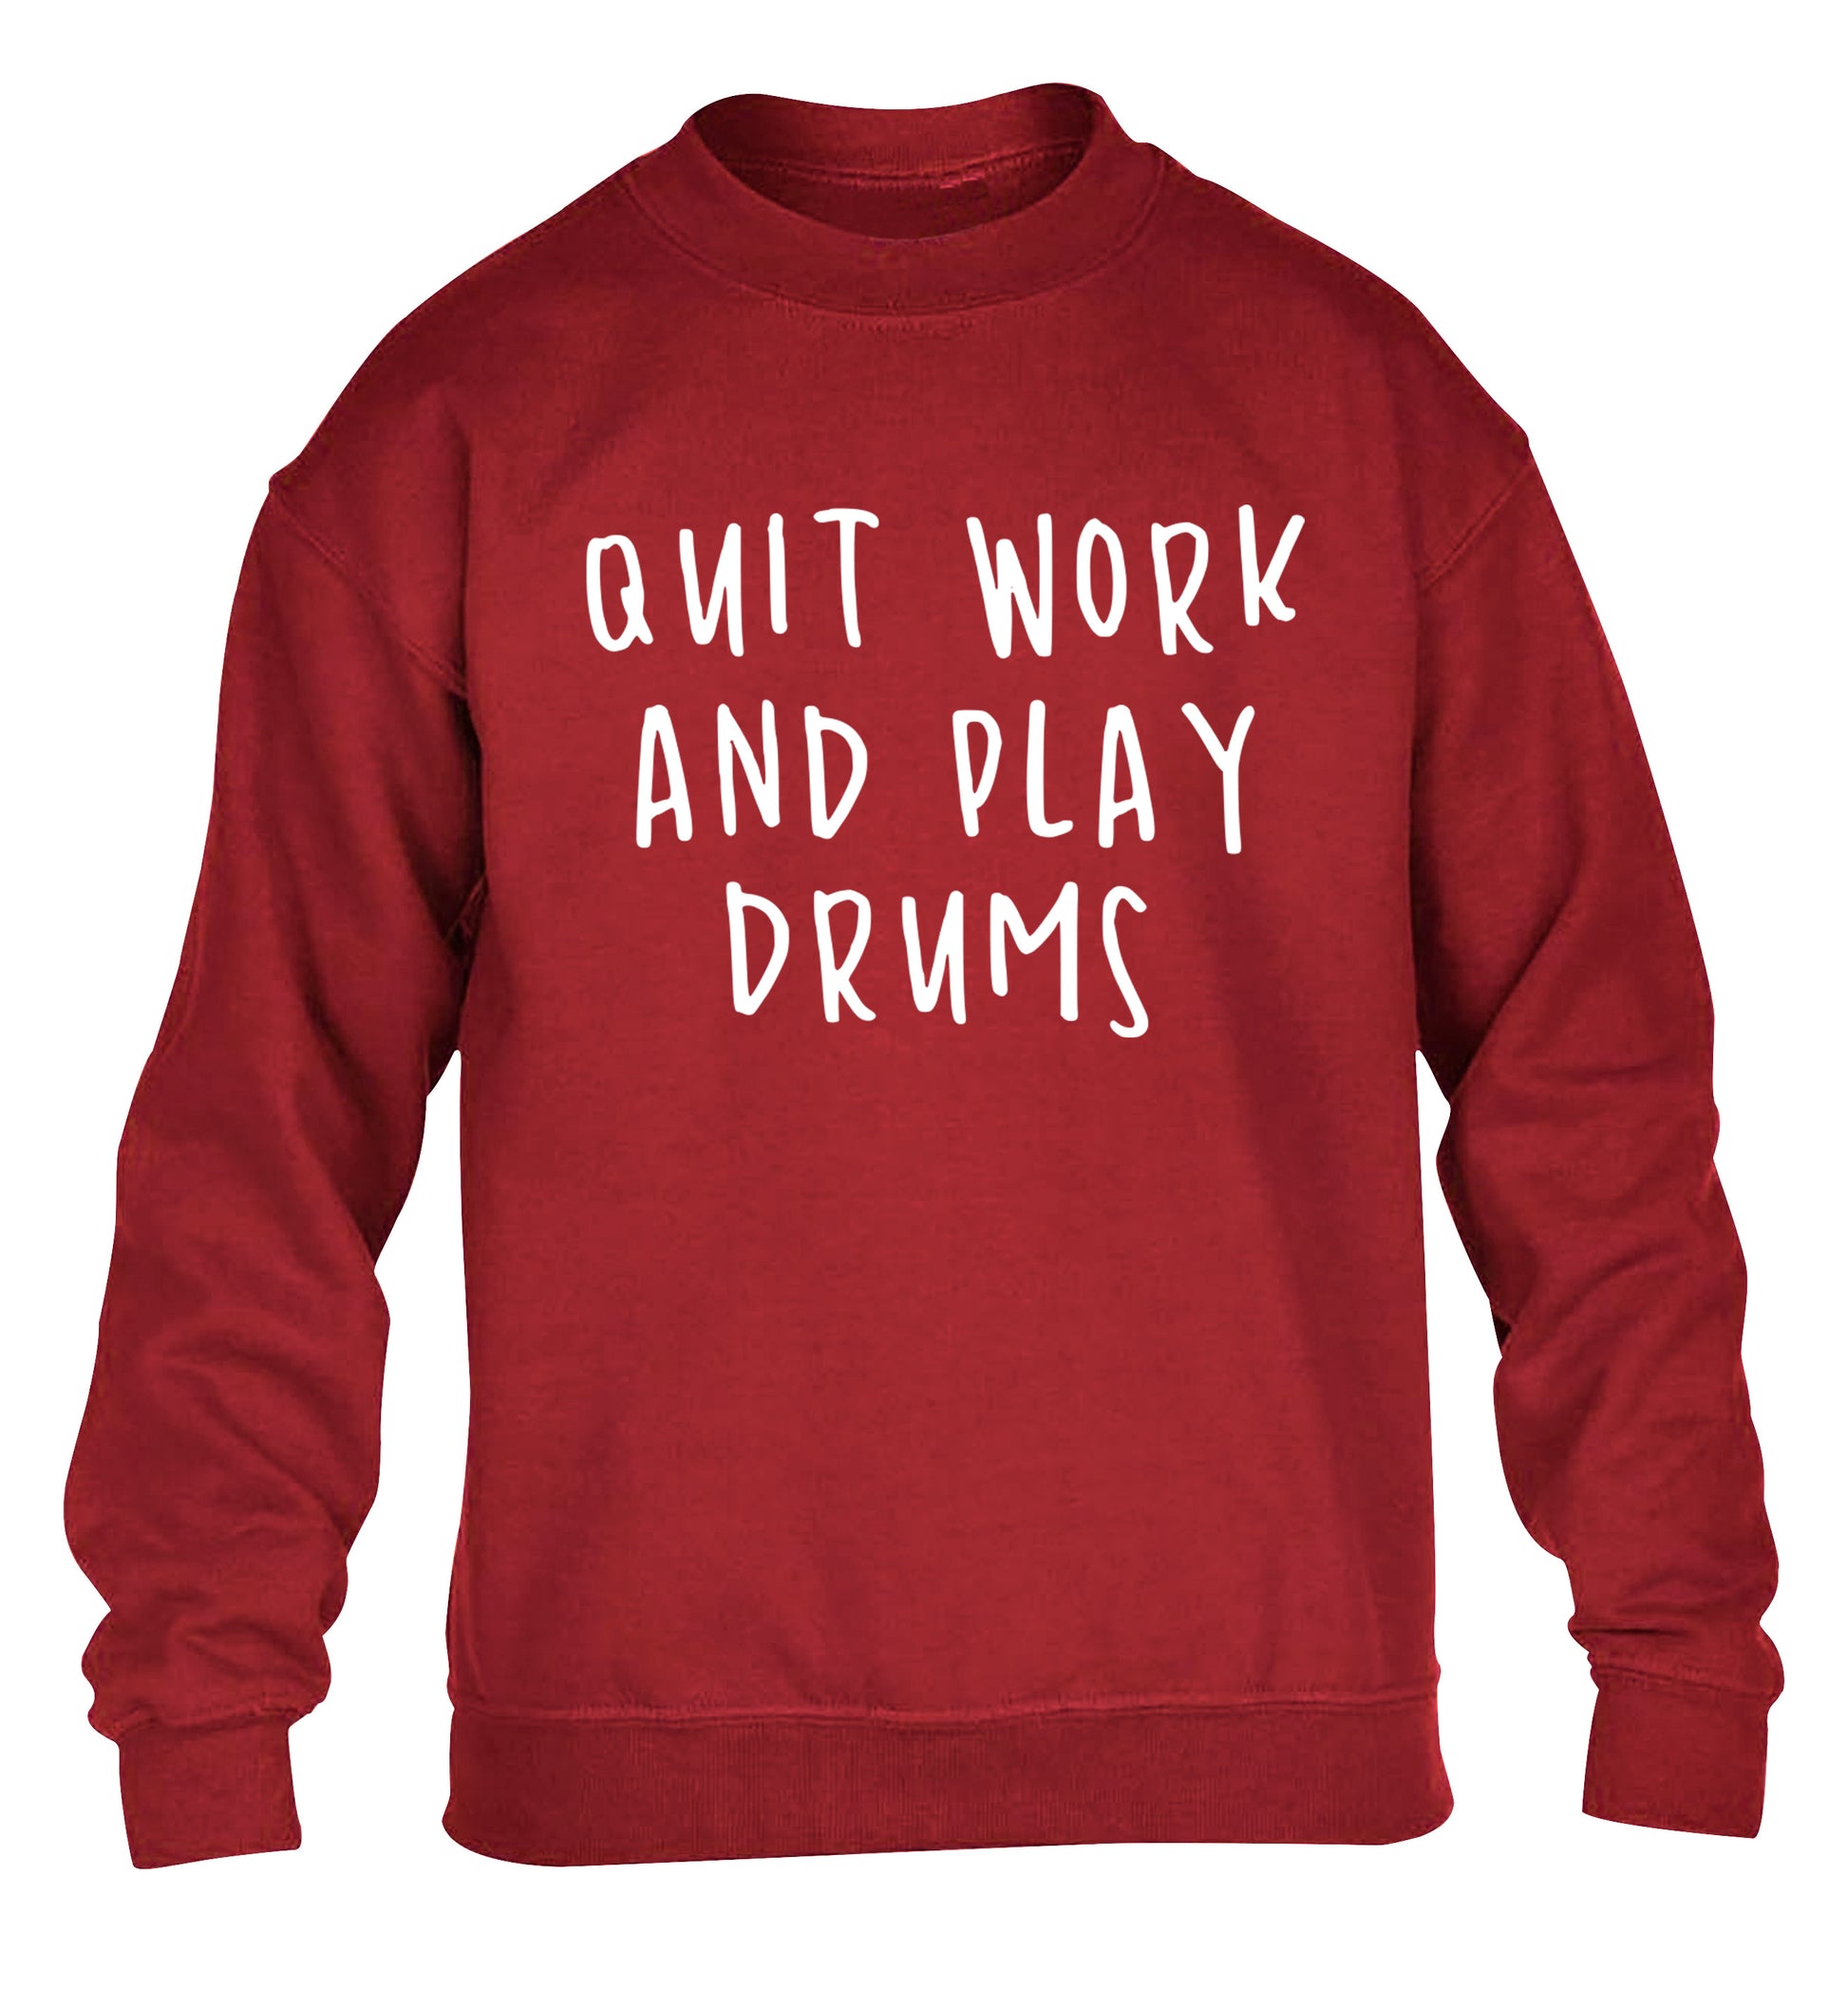 Quit work and play drums children's grey sweater 12-14 Years